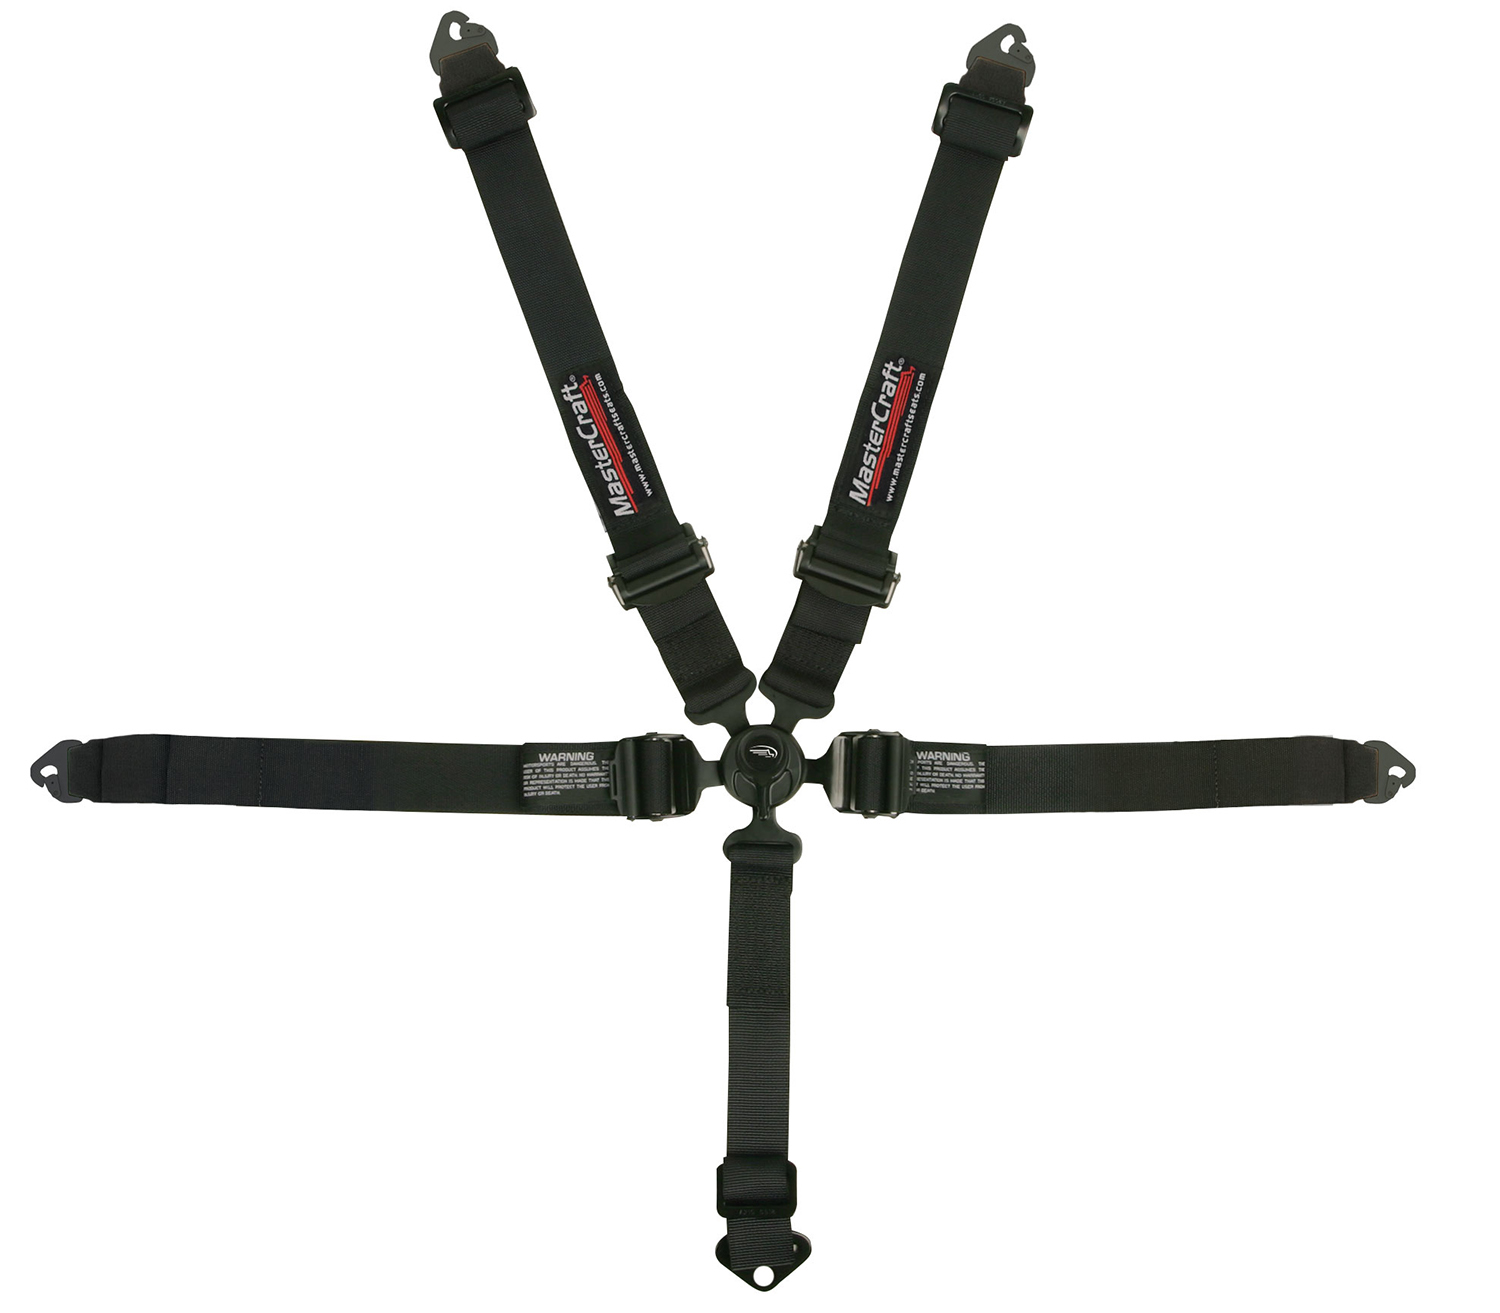 Mastercraft 111254 Harness, 5 Point, SFI 16.1, Snap-On, 2 in Straps, Pull Down Adjust, Individual Harness, Black, Kit